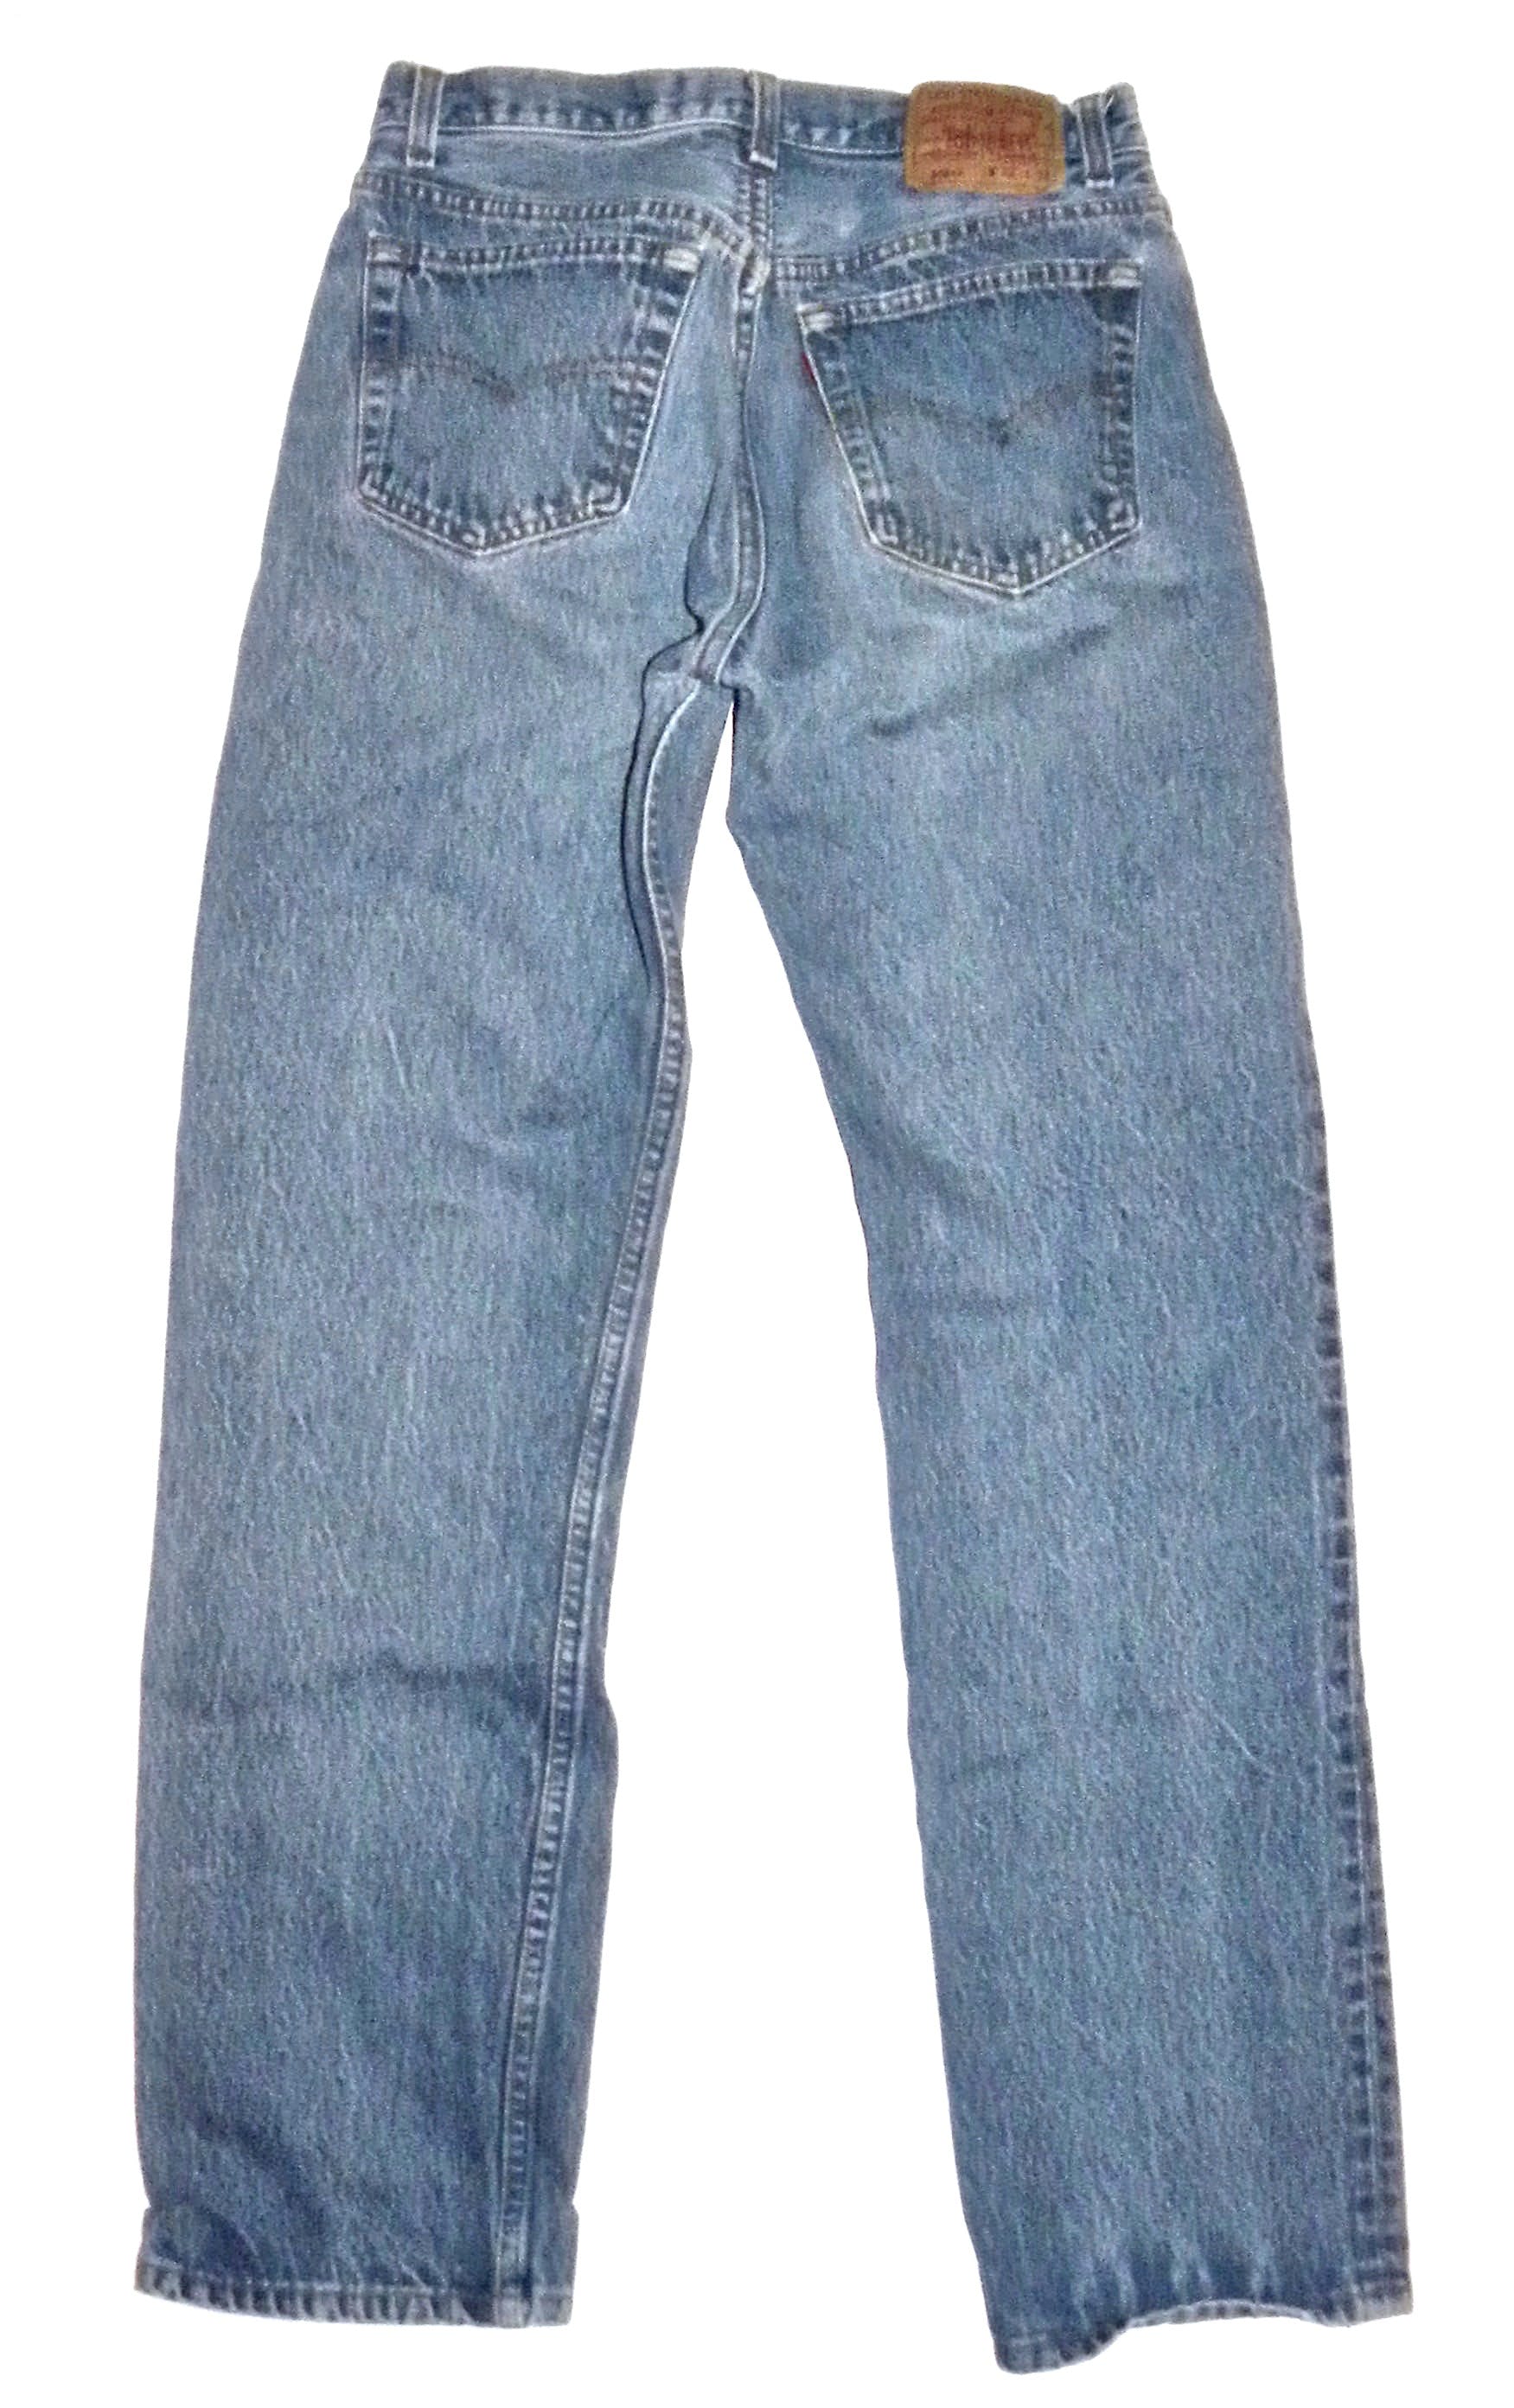 Vintage Faded Blue Jeans by Levi's | Shop THRILLING